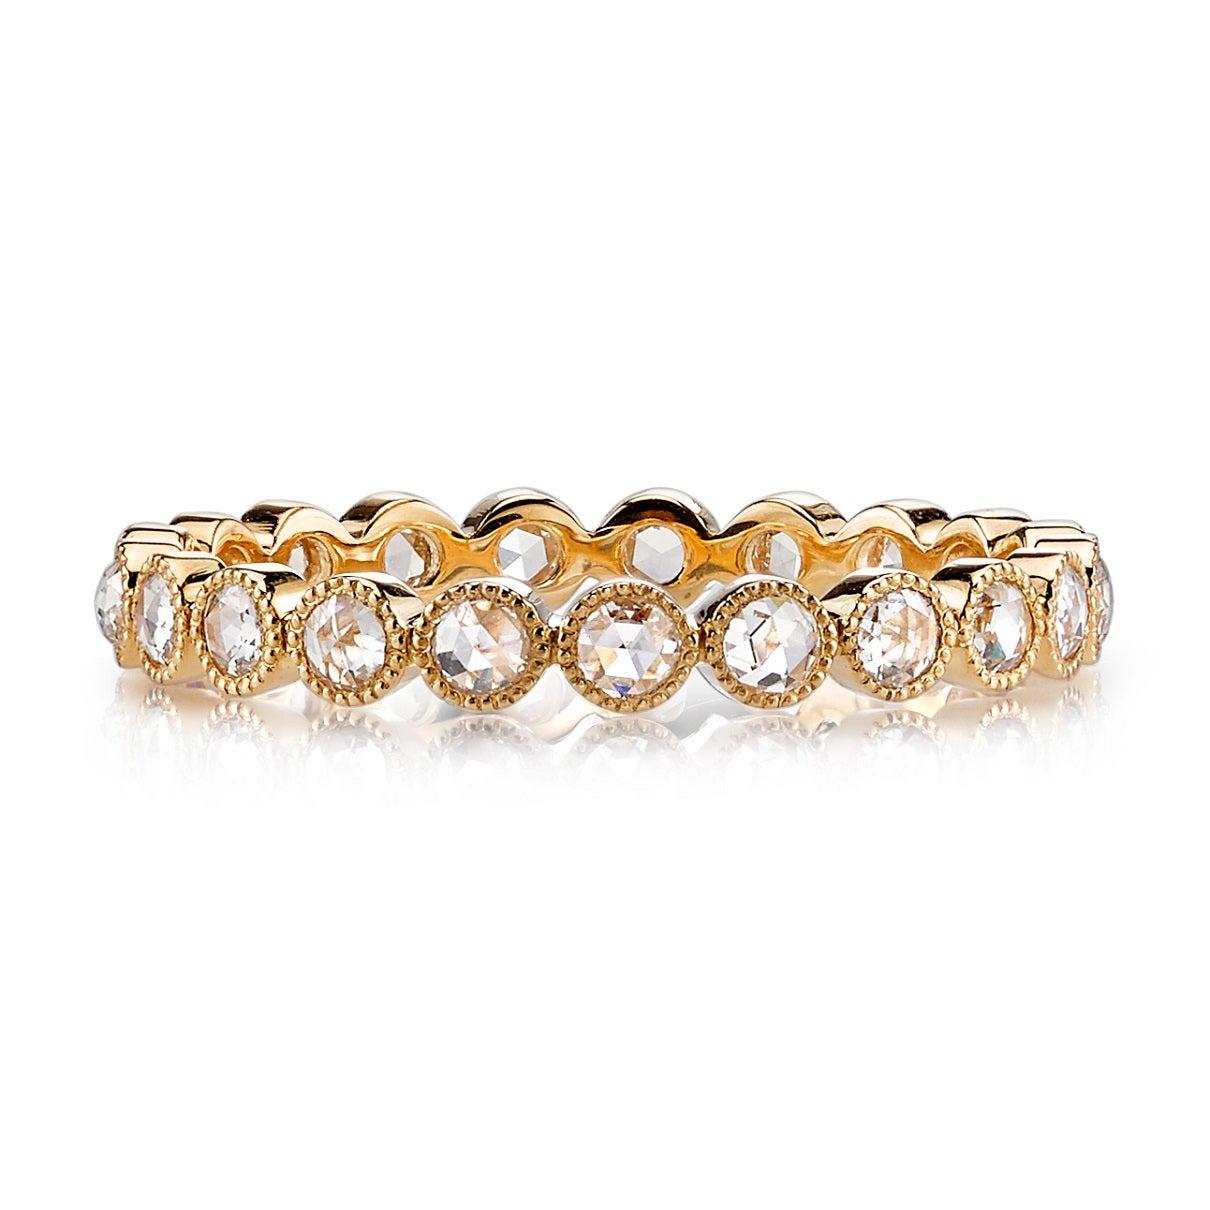 For Sale:  Handcrafted Gabby Rose Cut Diamond Eternity Band by Single Stone 2